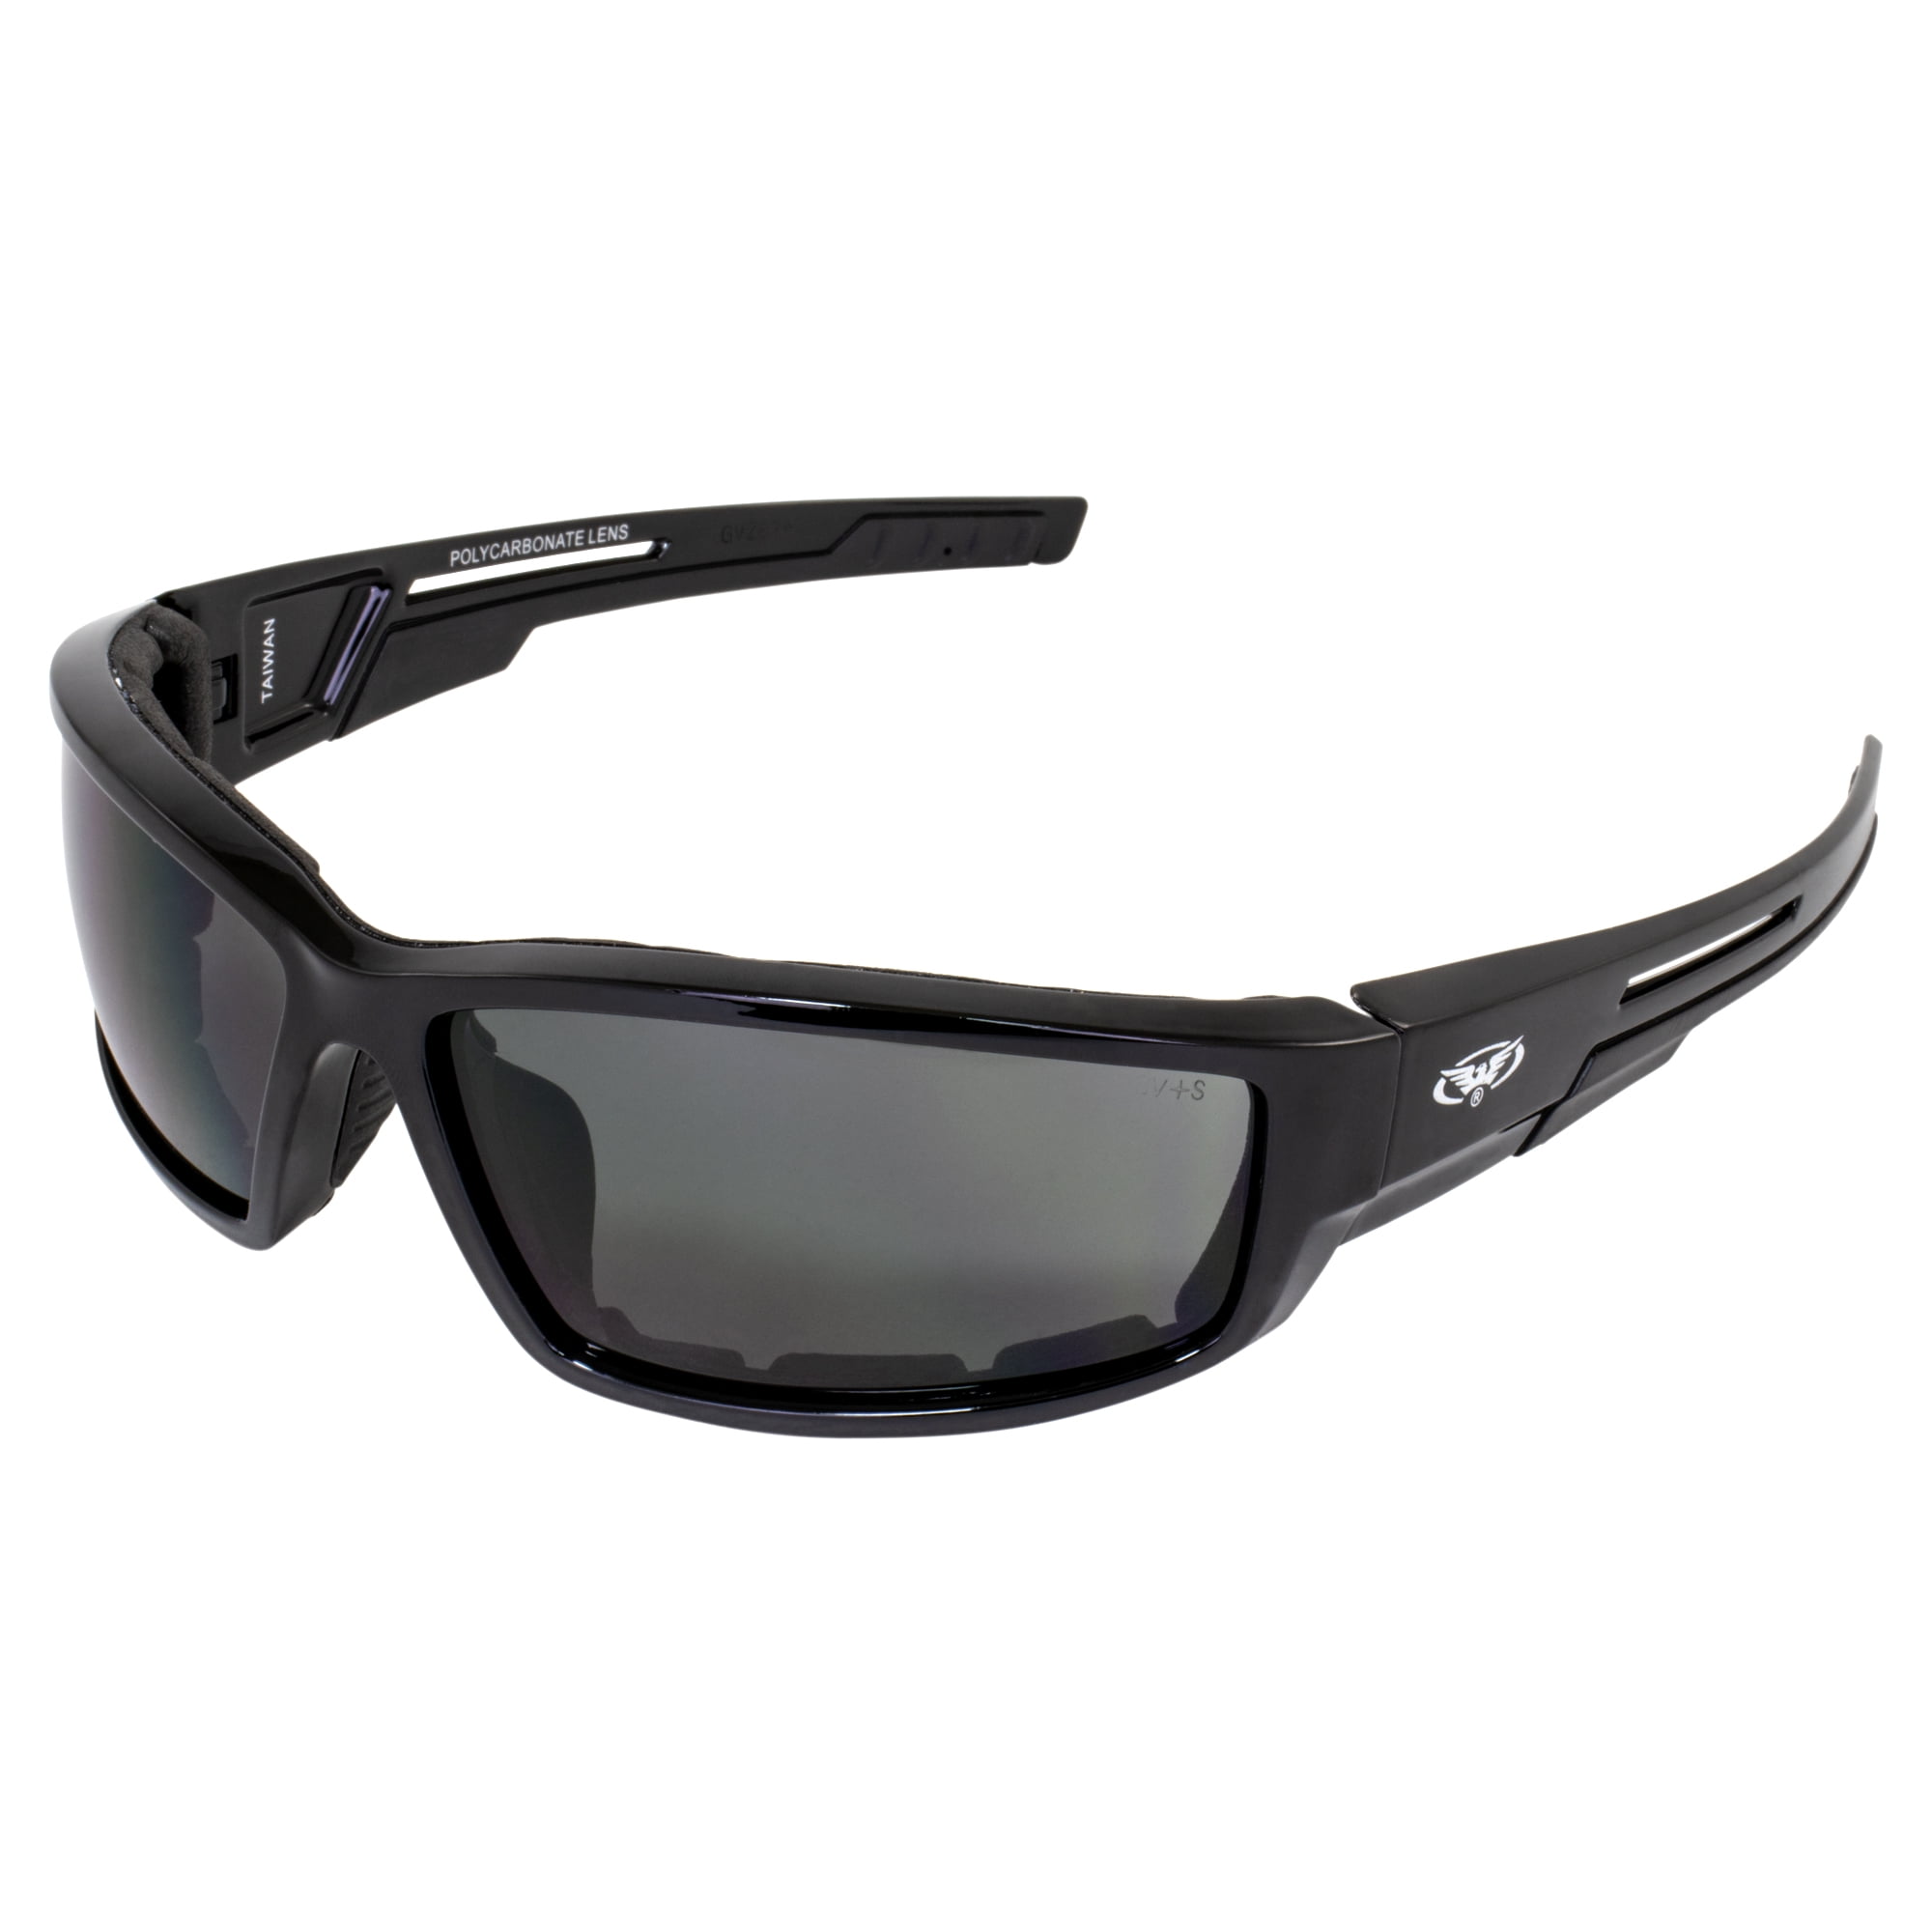 Maxx Safety Glasses Series black smoke lens ANSI Z87 CERTIFIED SS2 motorcycle 